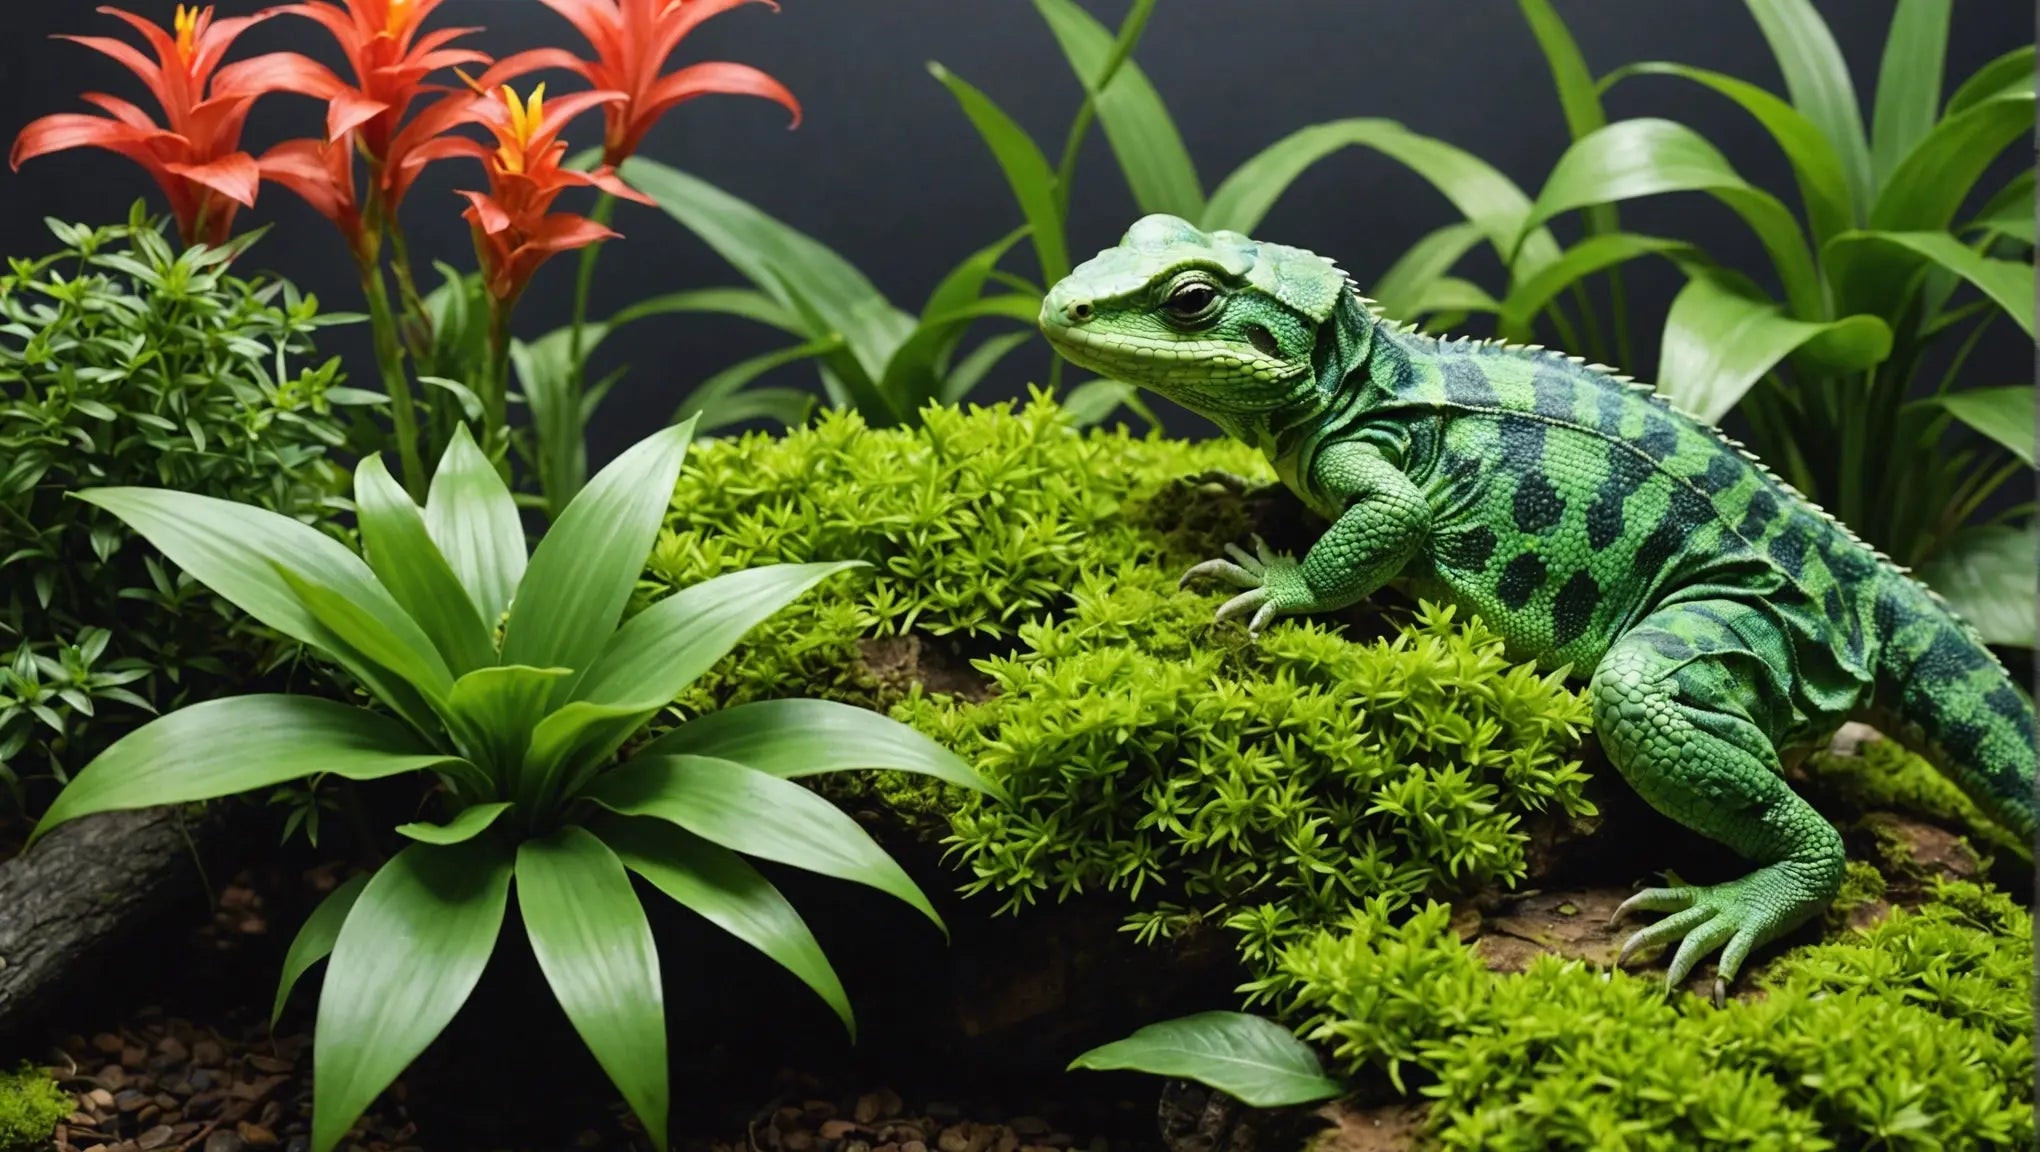 Enhance Your Reptile's Habitat with Stunning Plants and Ornaments